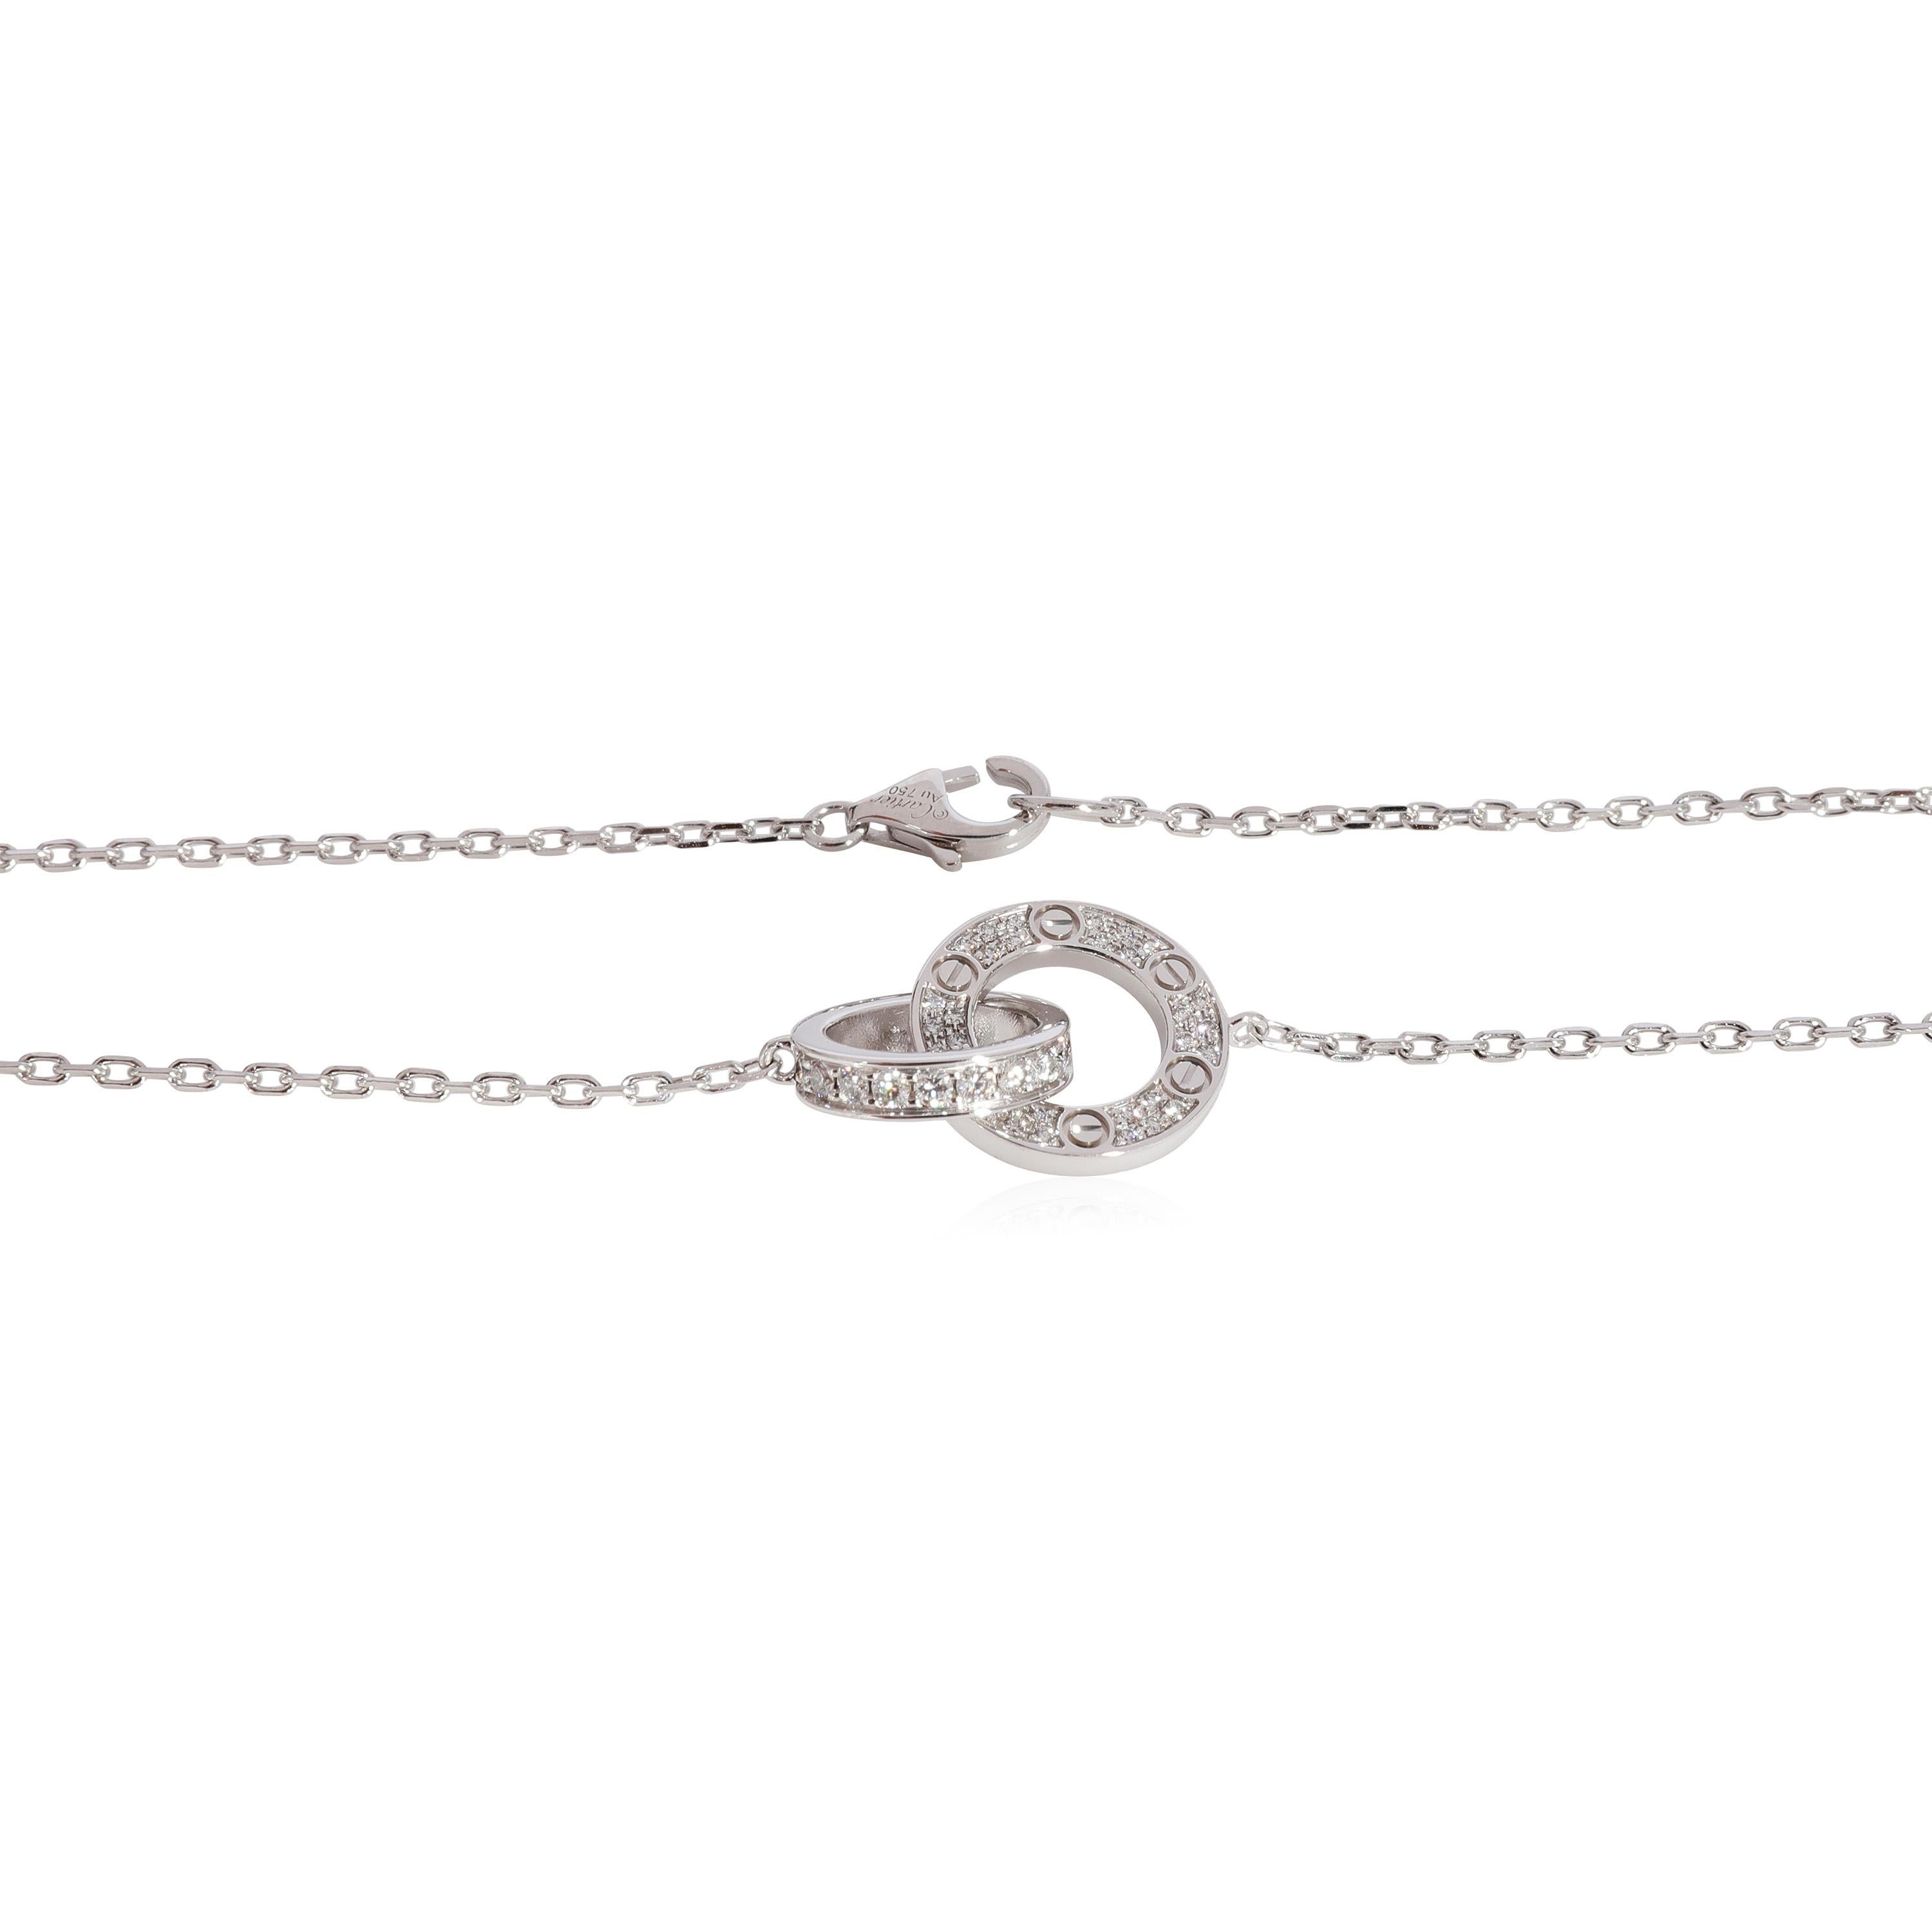 Cartier Love Pave Interlocking Circle Necklace in 18K White Gold 0.30 Ctw

PRIMARY DETAILS
SKU: 123540
Listing Title: Cartier Love Pave Interlocking Circle Necklace in 18K White Gold 0.30 Ctw
Condition Description: Retails for 5900 USD. In excellent